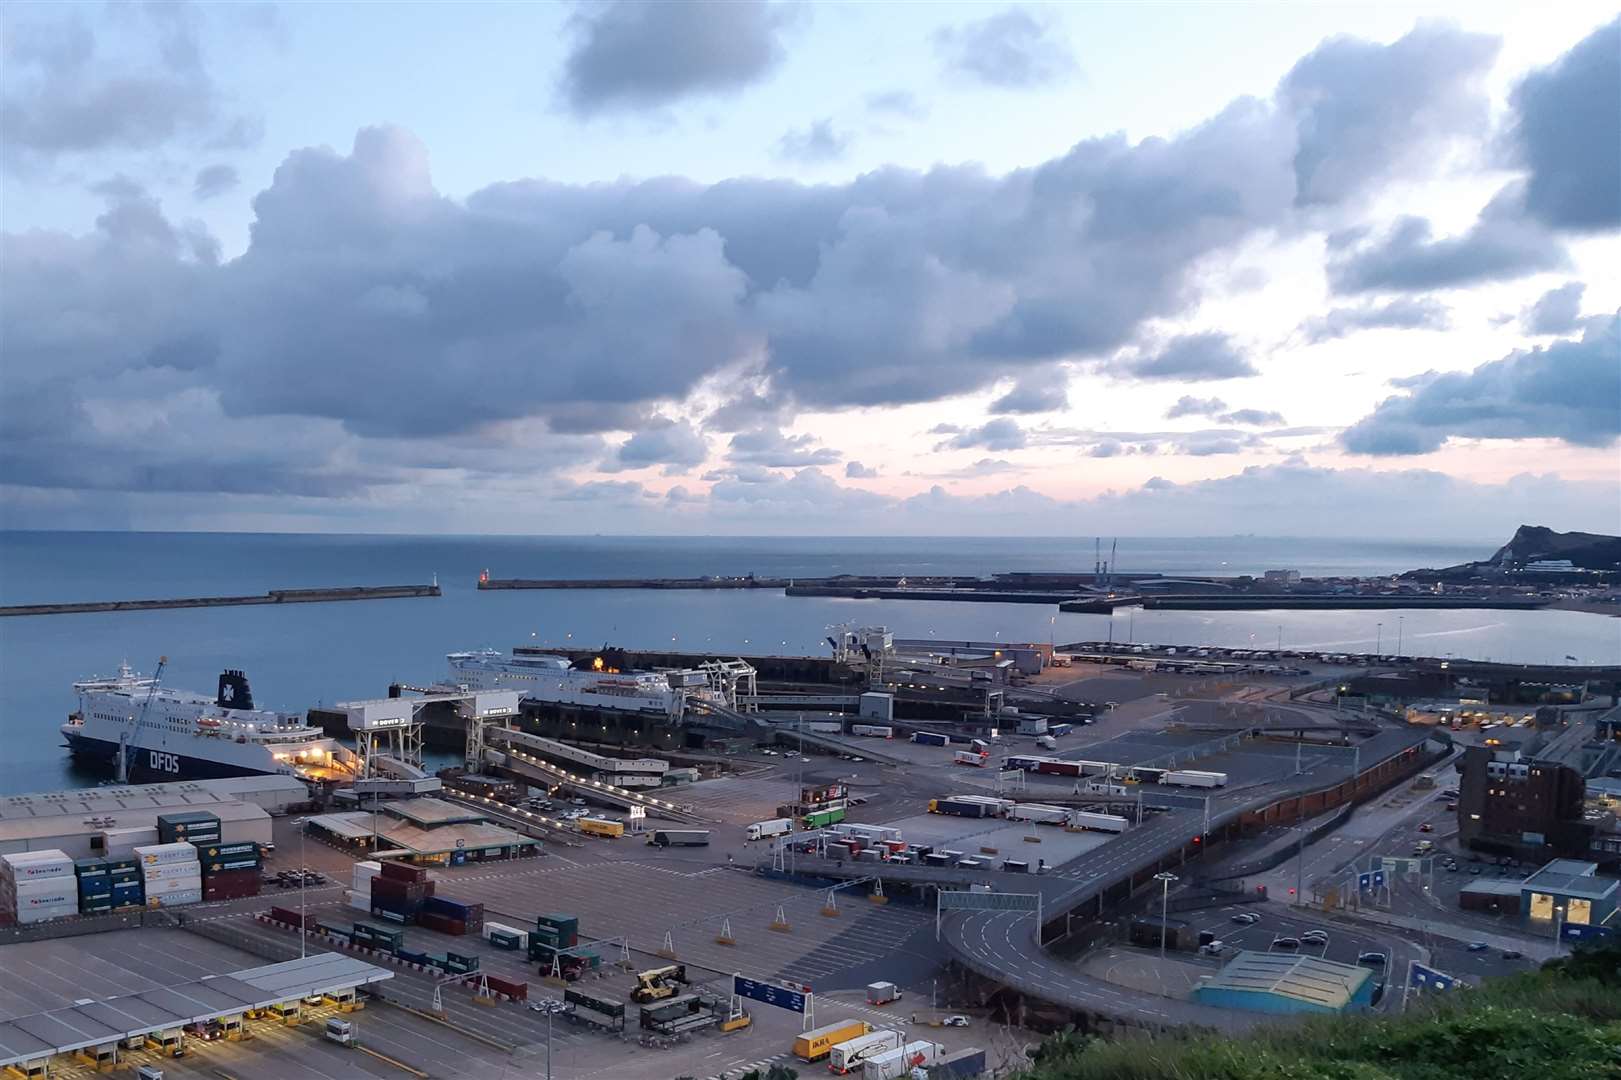 Dover Eastern Docks, owned by the Port of Dover